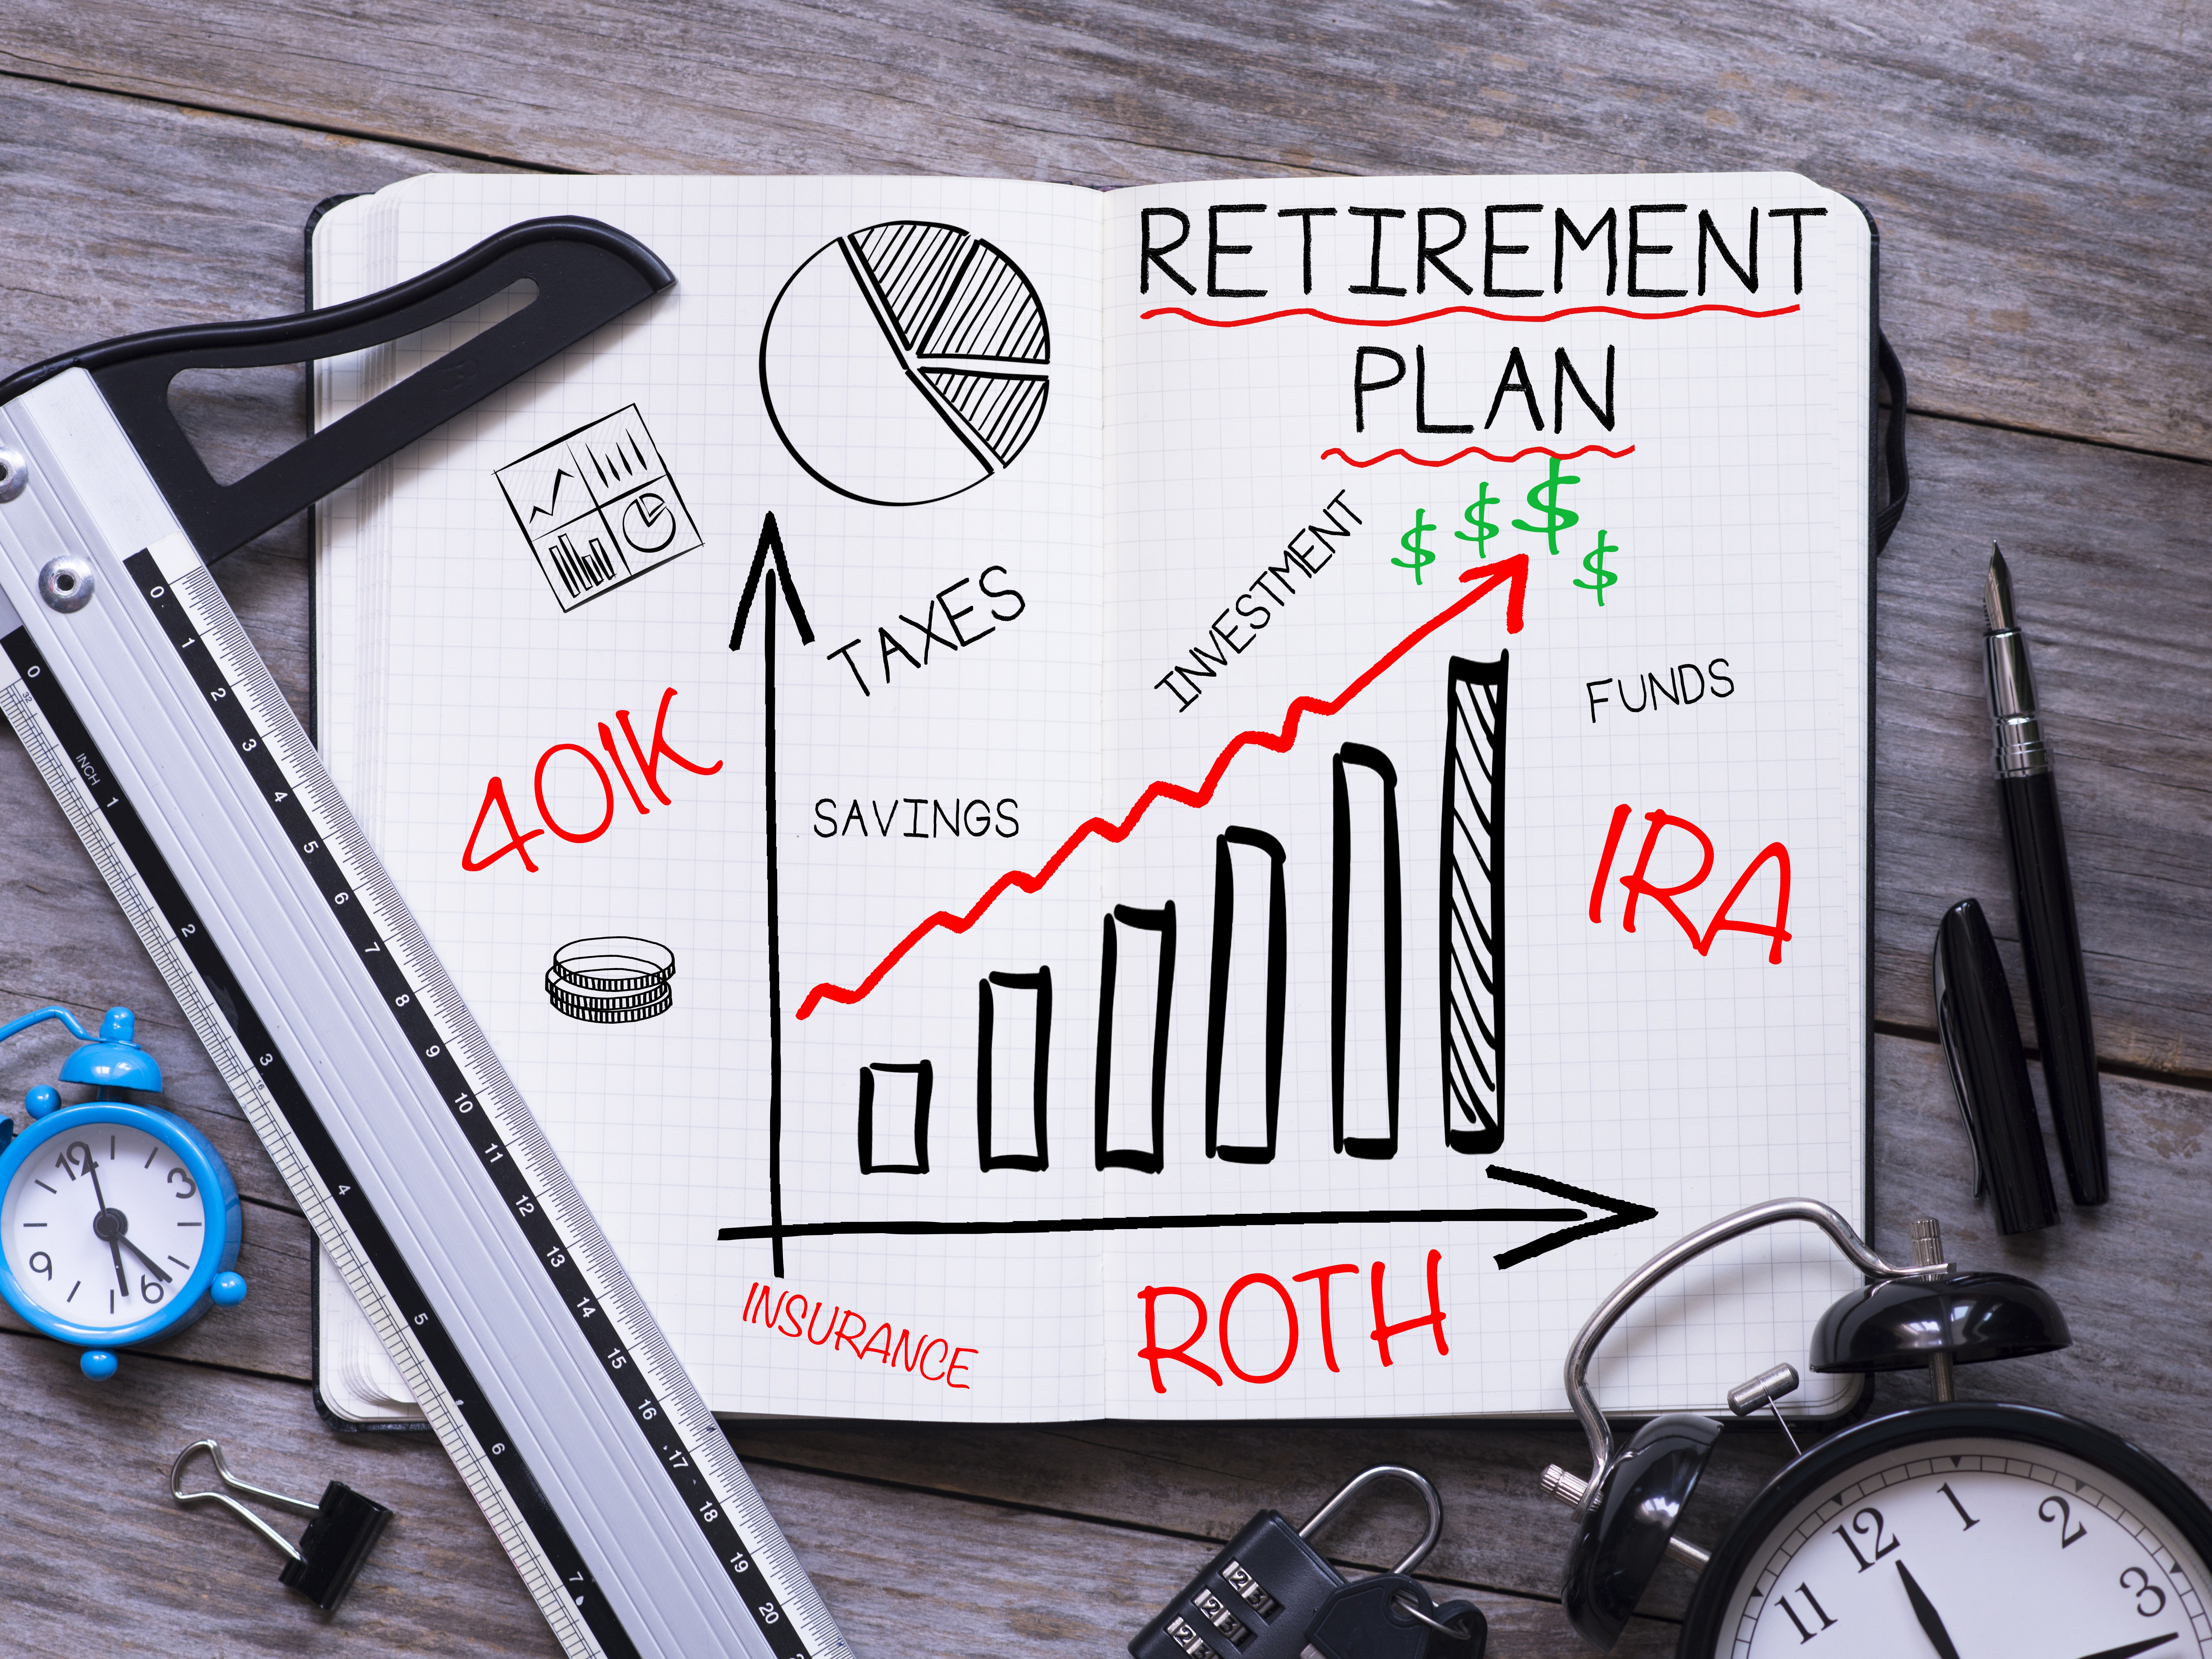 How To Roll Over Your 401(k) To An Ira Can Be Fun For Anyone